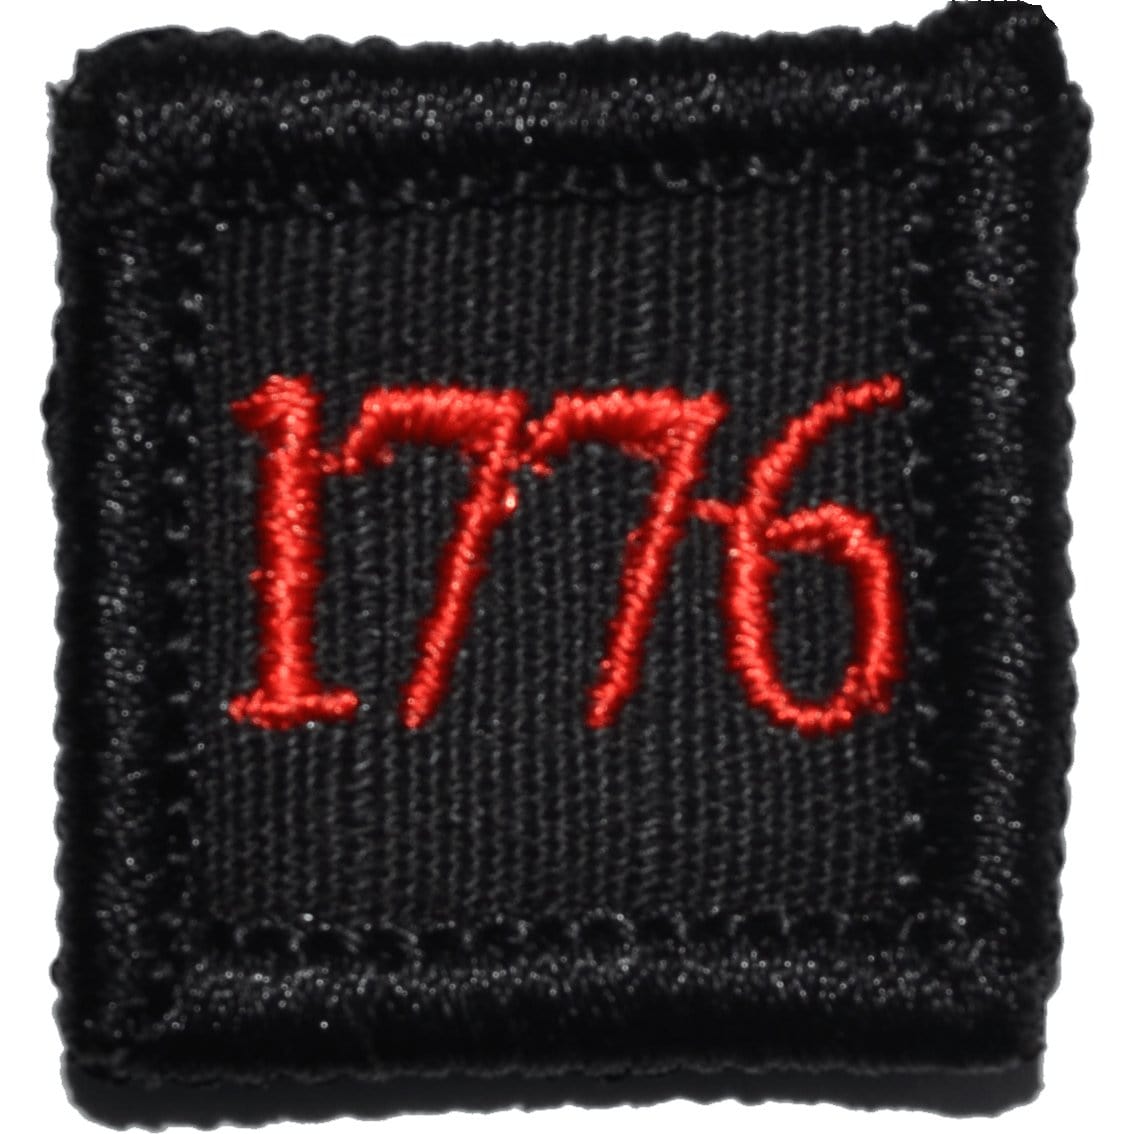 Tactical Gear Junkie Patches Black w/ Red 1776 - 1x1 Patch